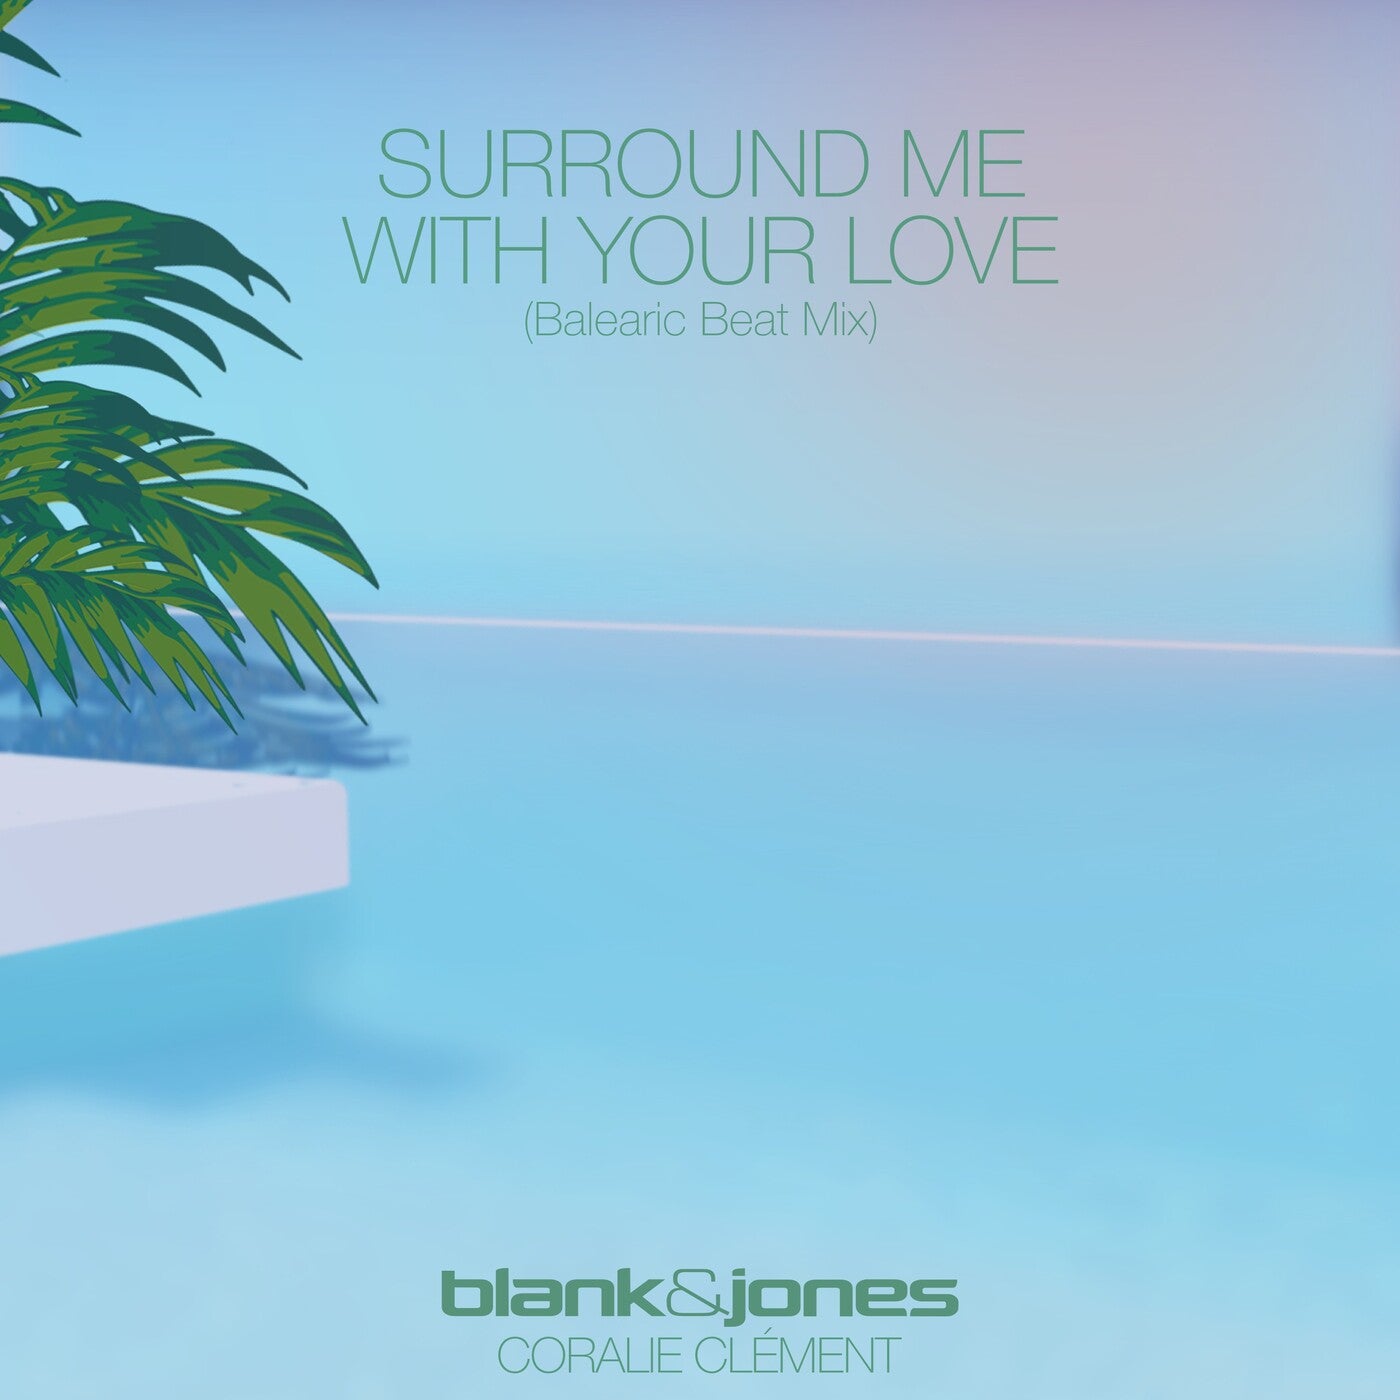 Surround Me with Your Love (Balearic Beat Mix)